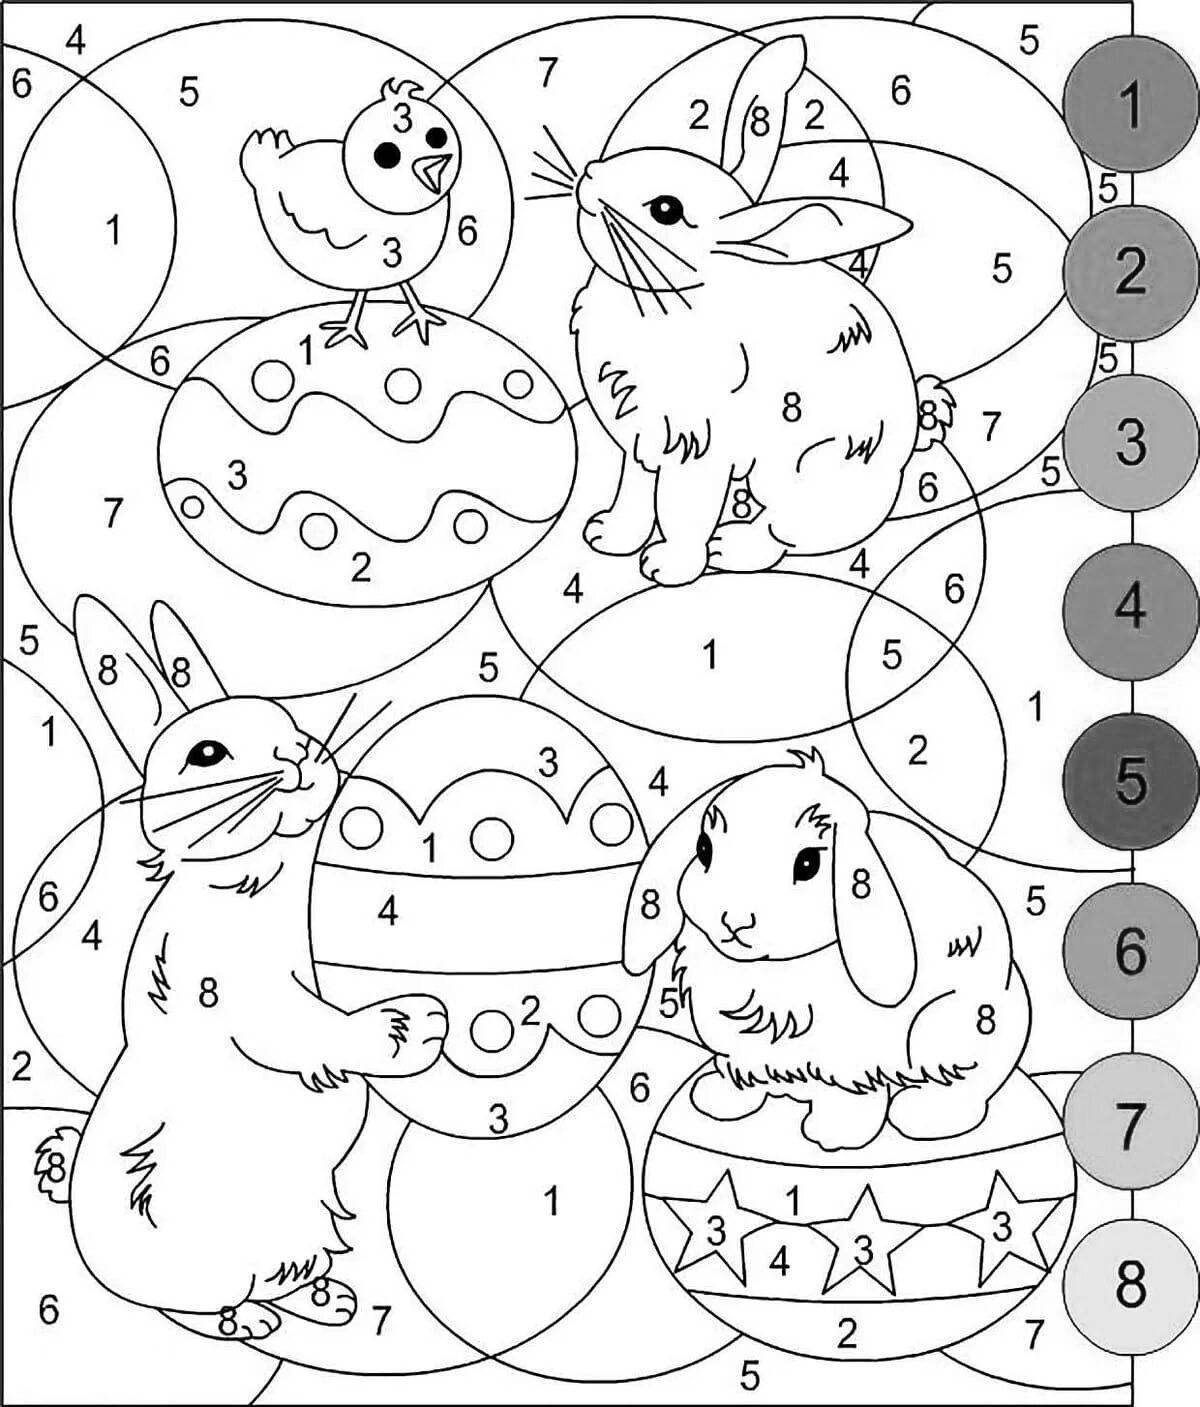 Fun coloring book for kids with colored numbers